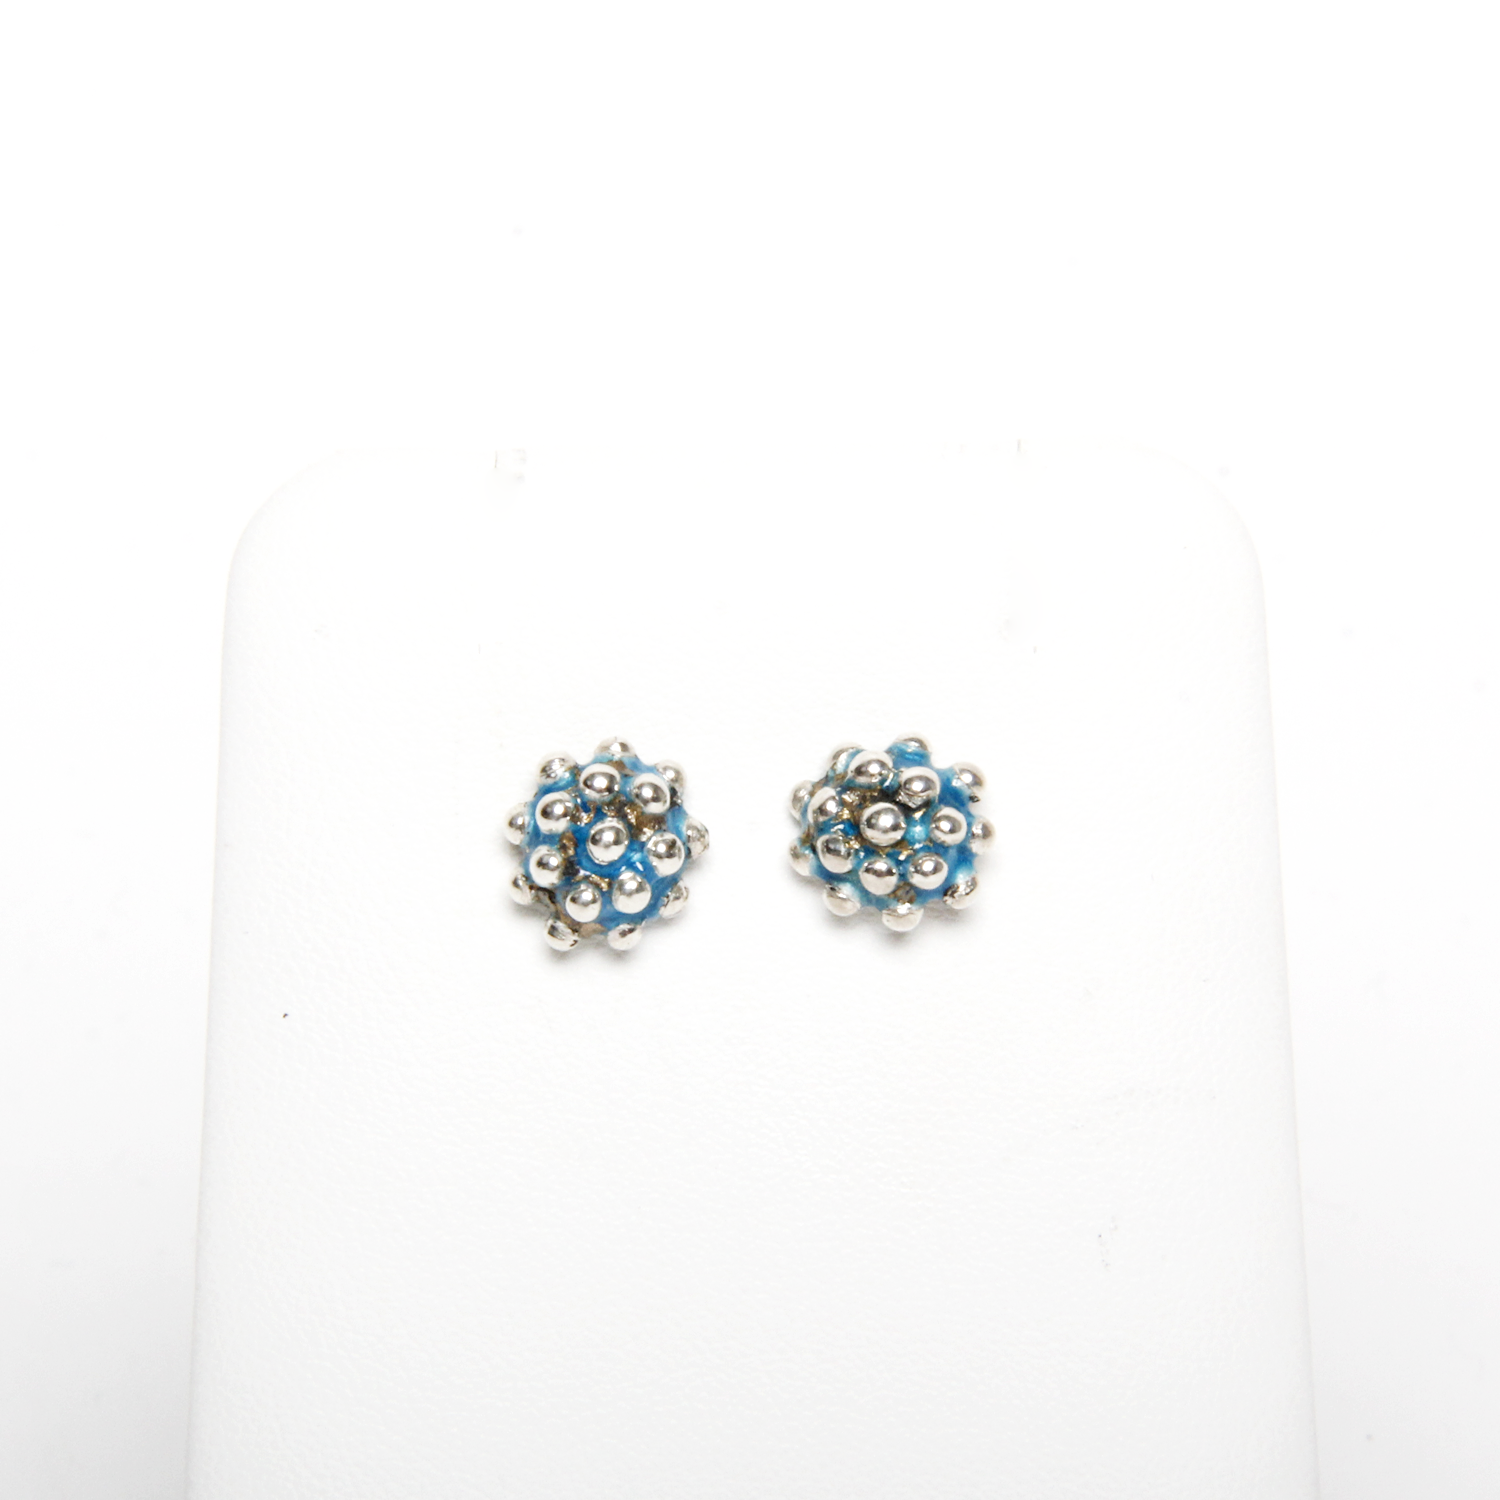 Cinelli Maillet: Mini Blowfish Earrings in Turquoise Product Image 2 of 2